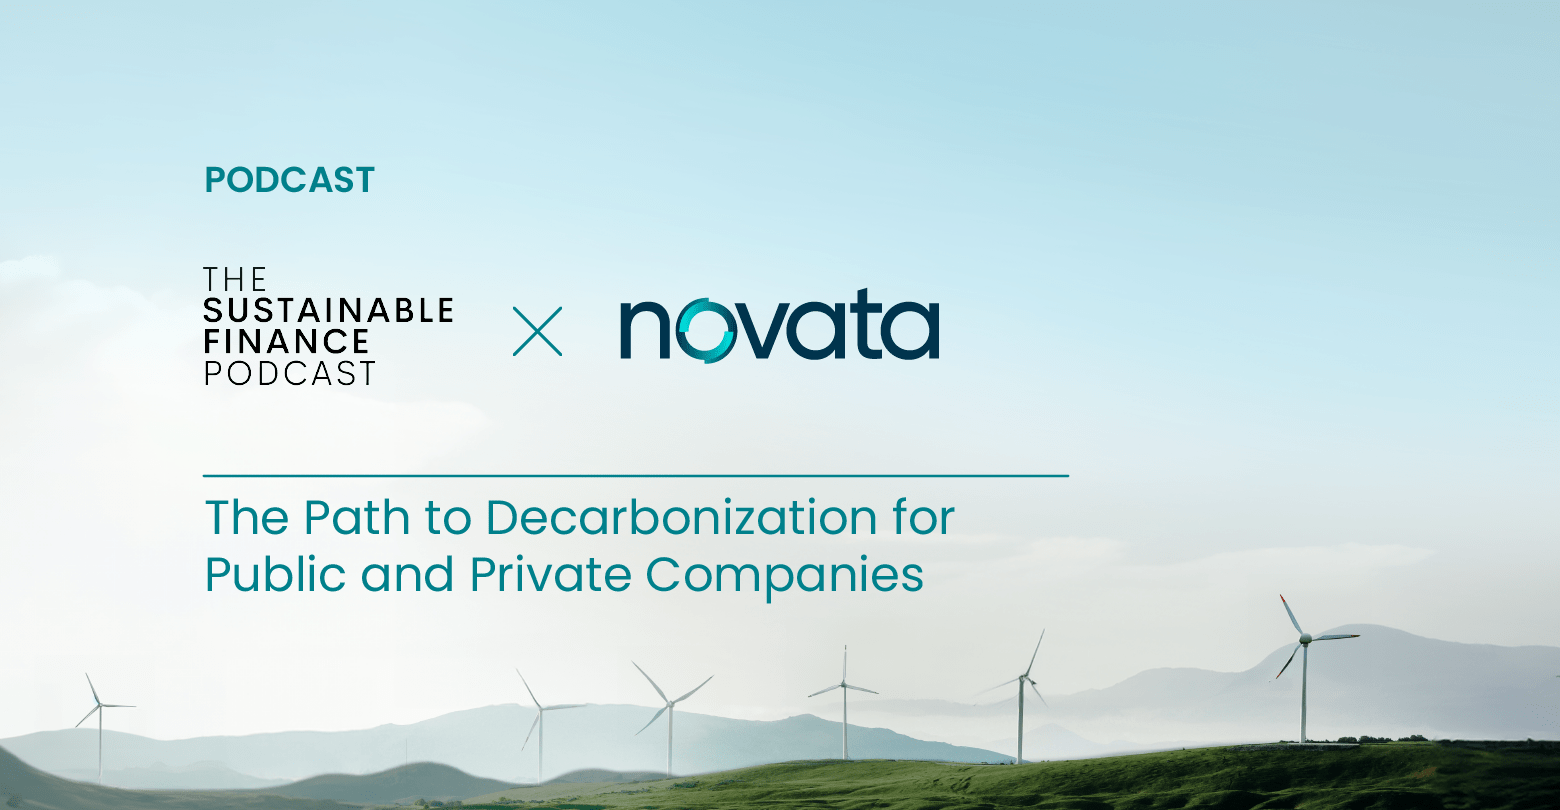 The Sustainable Finance Podcast x Novata: The Path to Decarbonization for Public and Private Companies